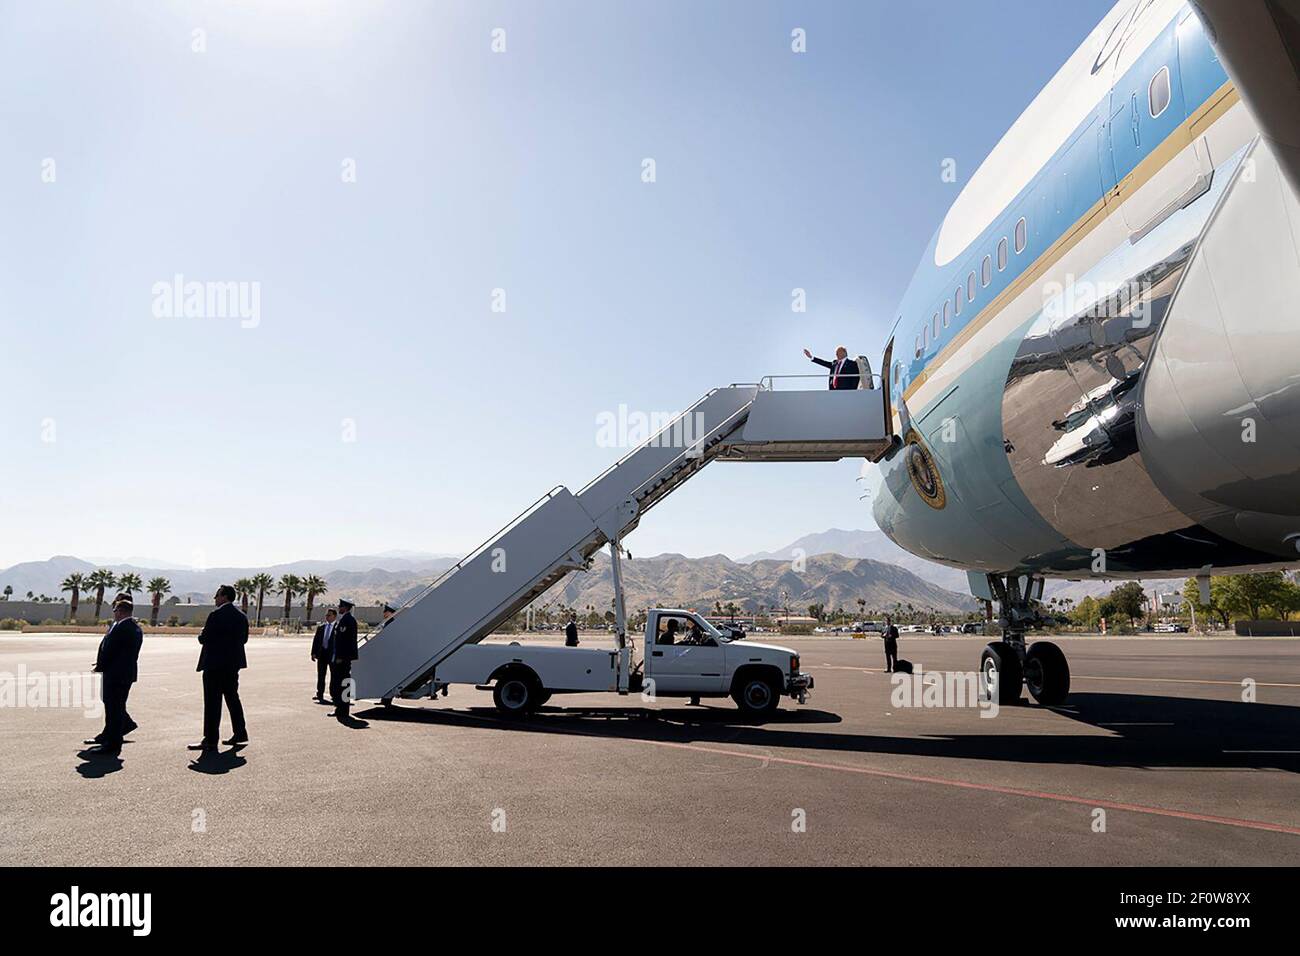 President Donald Trump waves as he disembarks Air Force One at Palm Spring International Airport in Palm Springs Calif. Wednesday Feb. 19 2020 en route to an event at the Porcupine Creek Golf Course in Rancho Mirage Calif Stock Photo